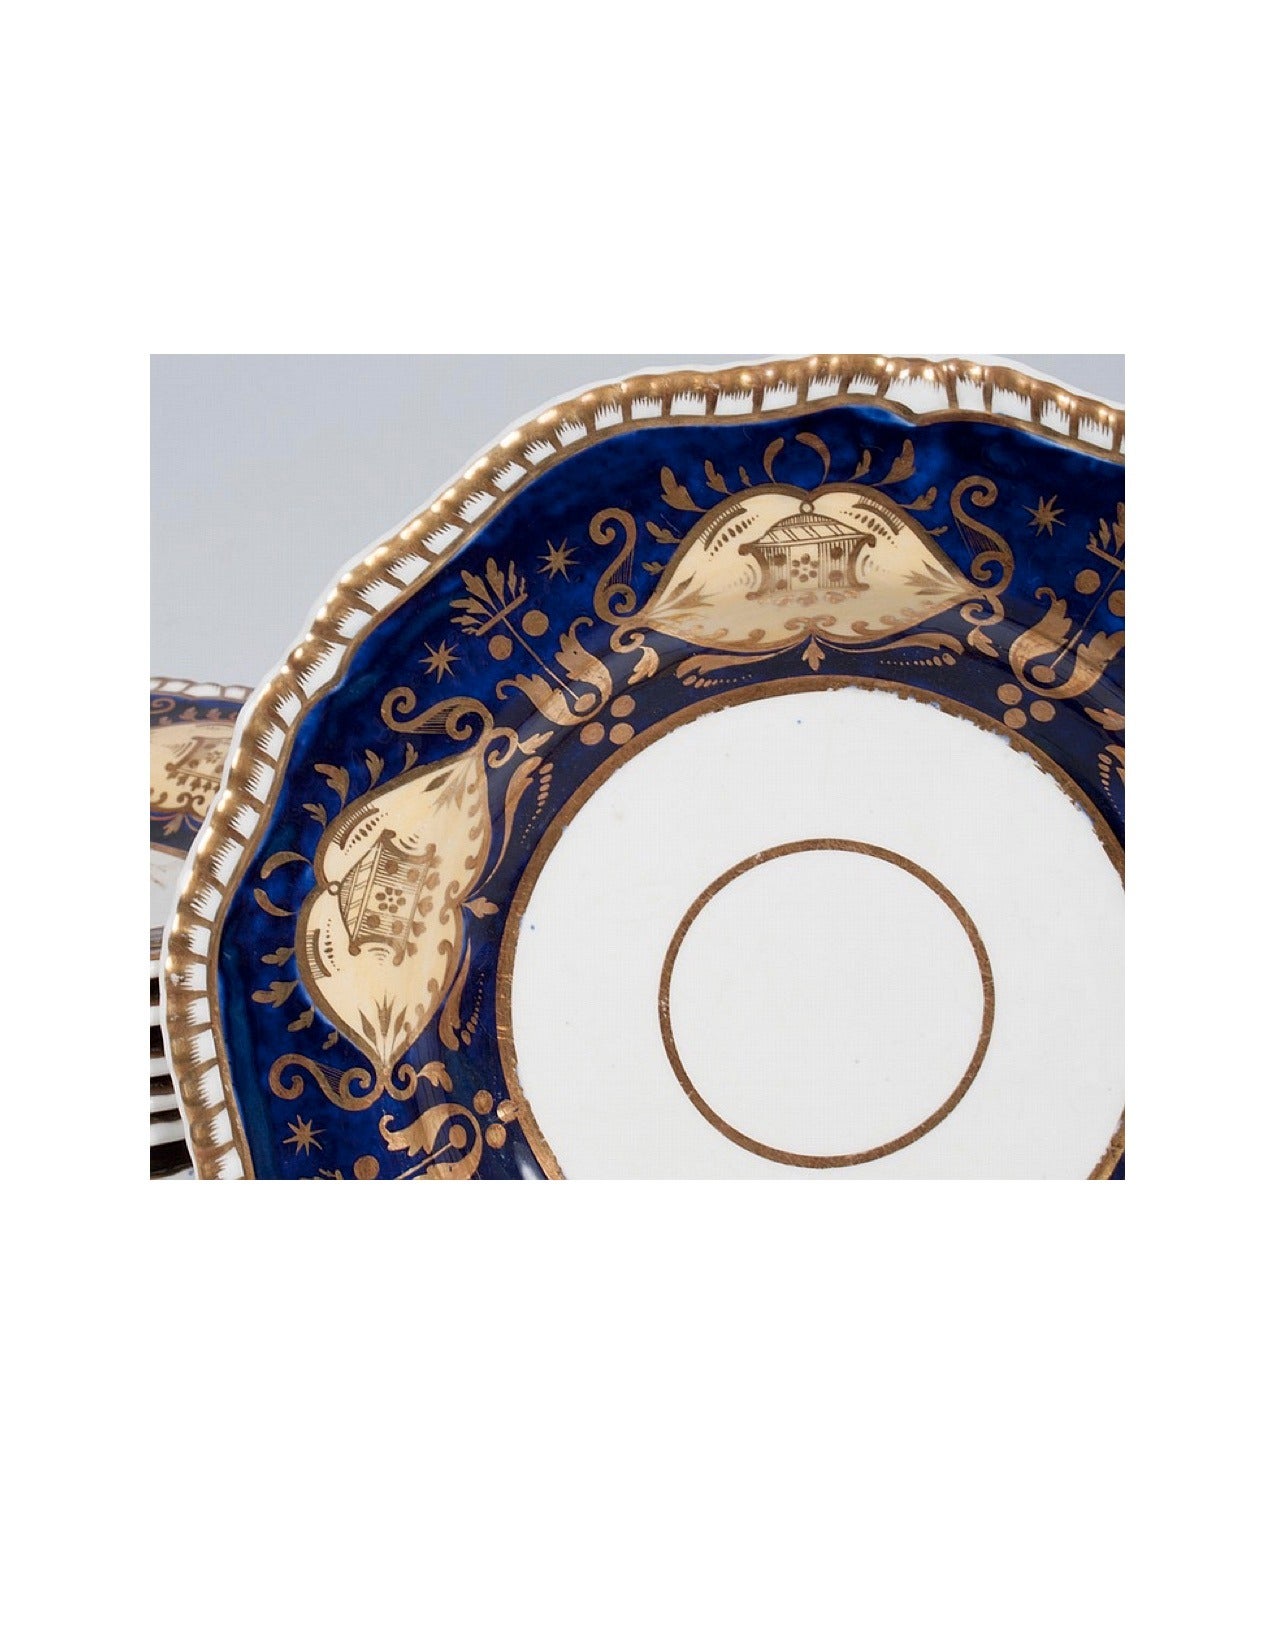 Thirteen pieces of beautifully decorated ca. 1820 set of deep dessert plates or shallow soup bowls with serpentine moulded gadrooned edges bordering the translucent cobalt glazed rims decorated with very fine Neoclassical ornament and colored